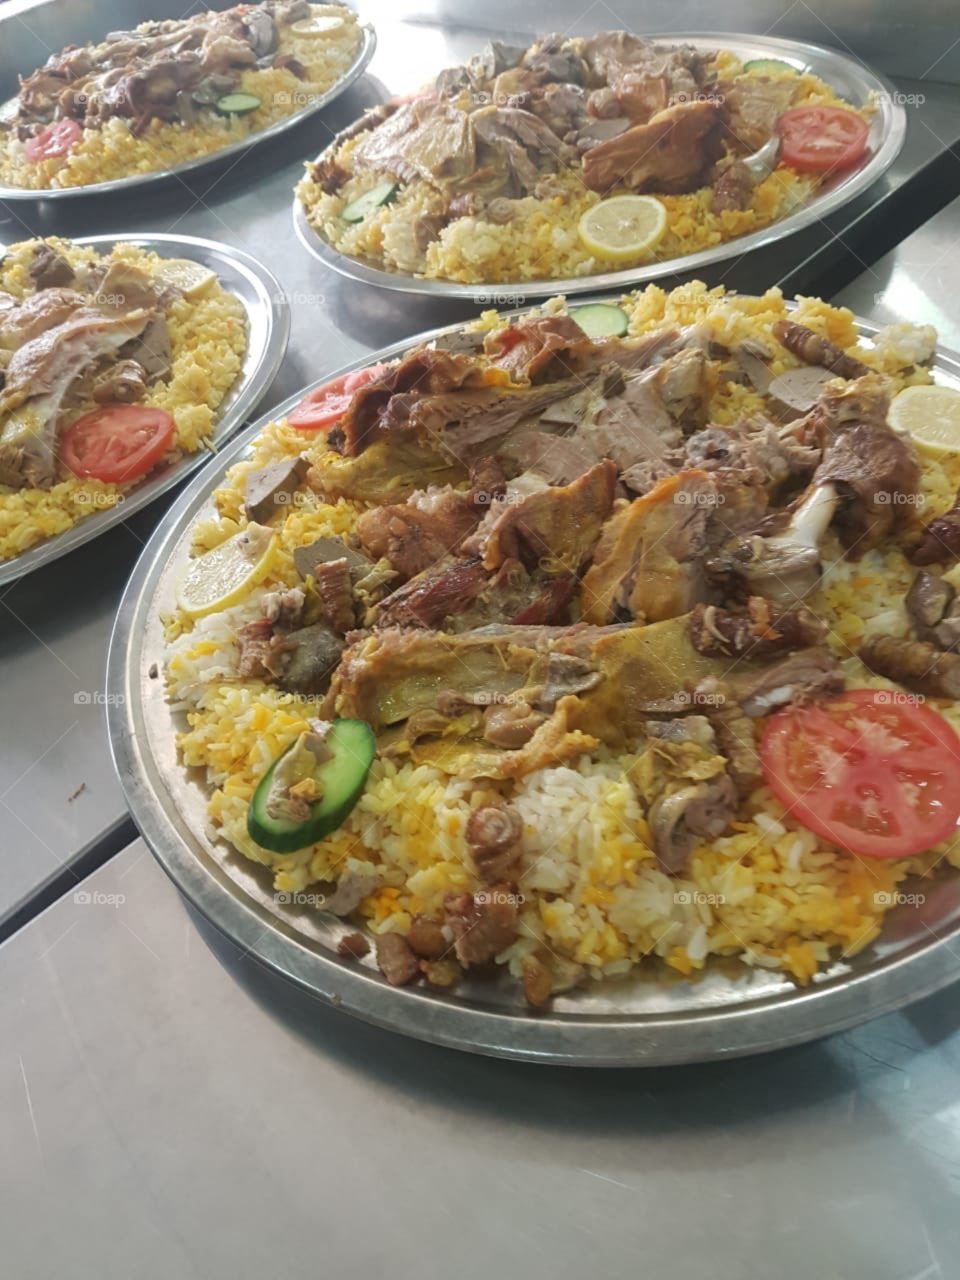 Laham Mandi or Lamb Mandi is a Saudi Arabian Traditional dish which is also very popular in other middle eastern countries like United Arab Emirates, Qatar, Kuwait, Oman and yemen.This photo was snapped while preparing to serve the wedding guest.